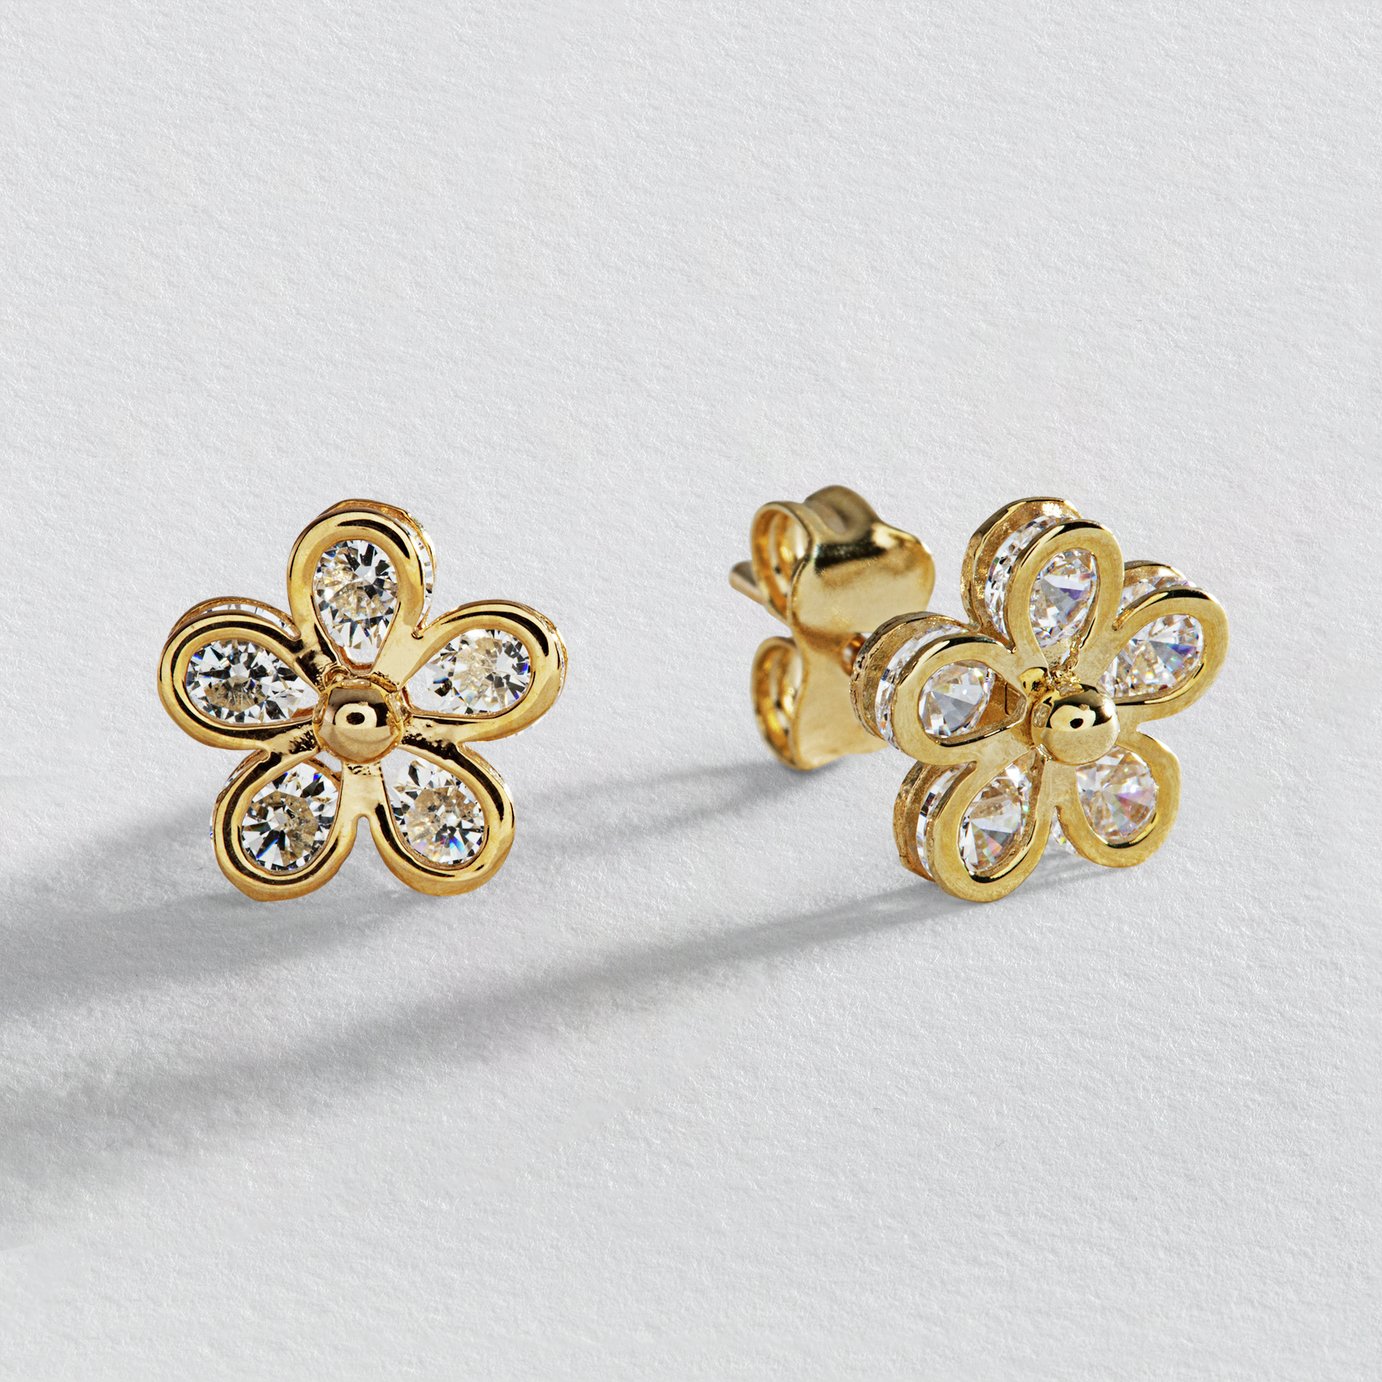 Revere 9ct Yellow Gold White Cubic Zirconia Stud Earrings